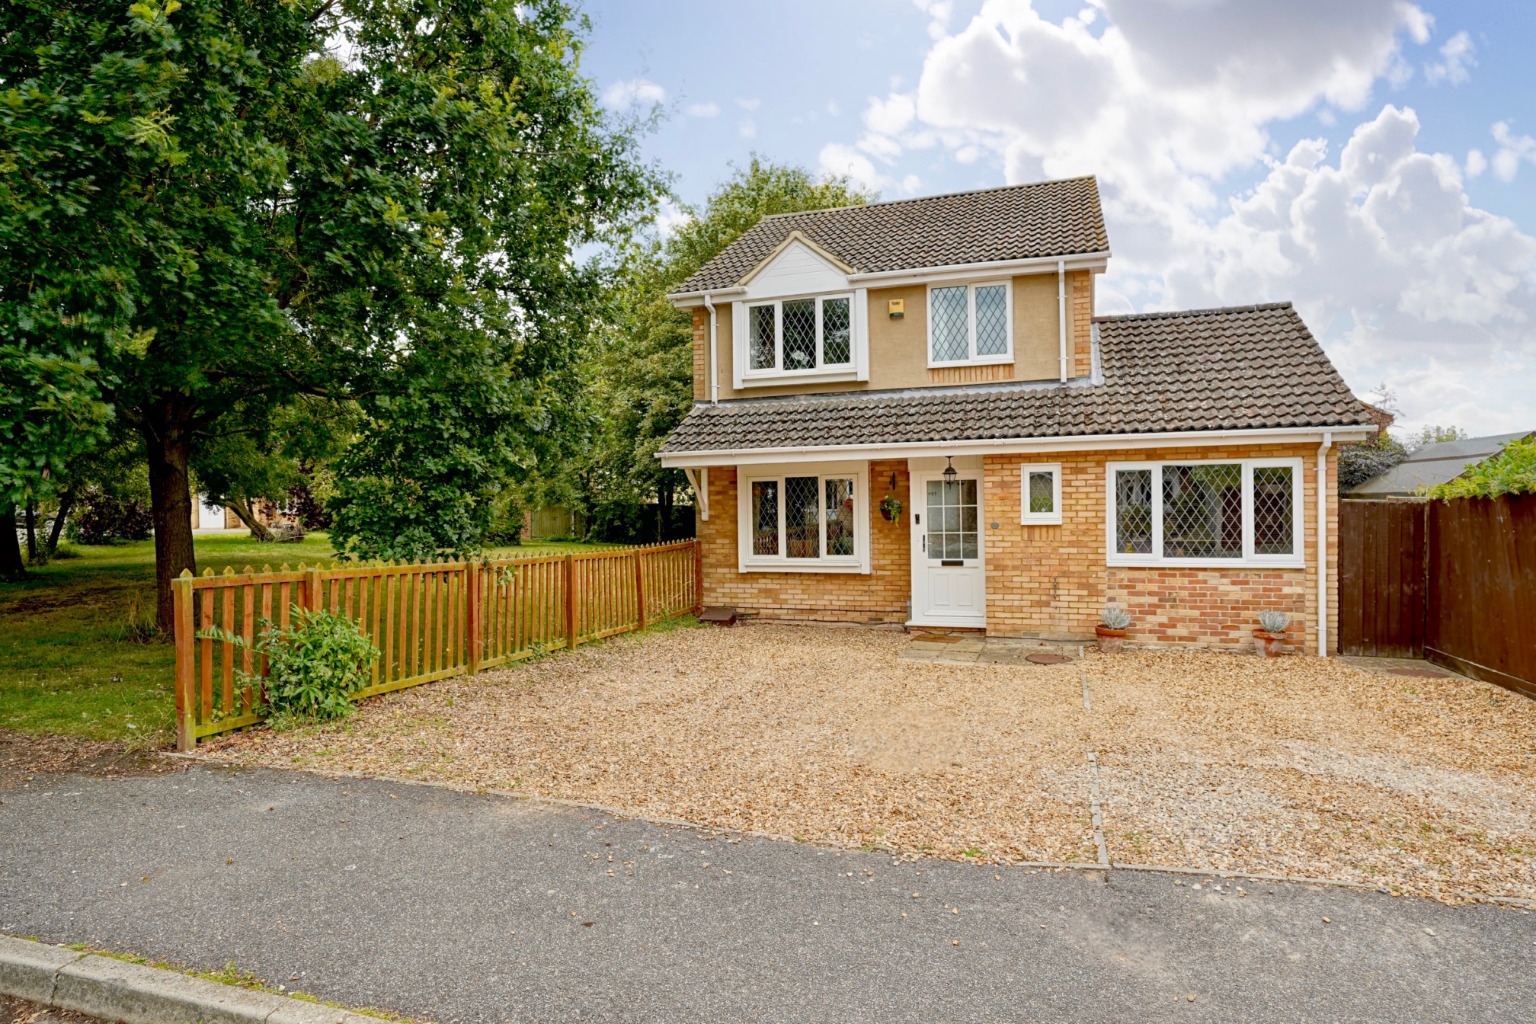 3 bed detached house for sale in Hillfield, Huntingdon - Property Image 1